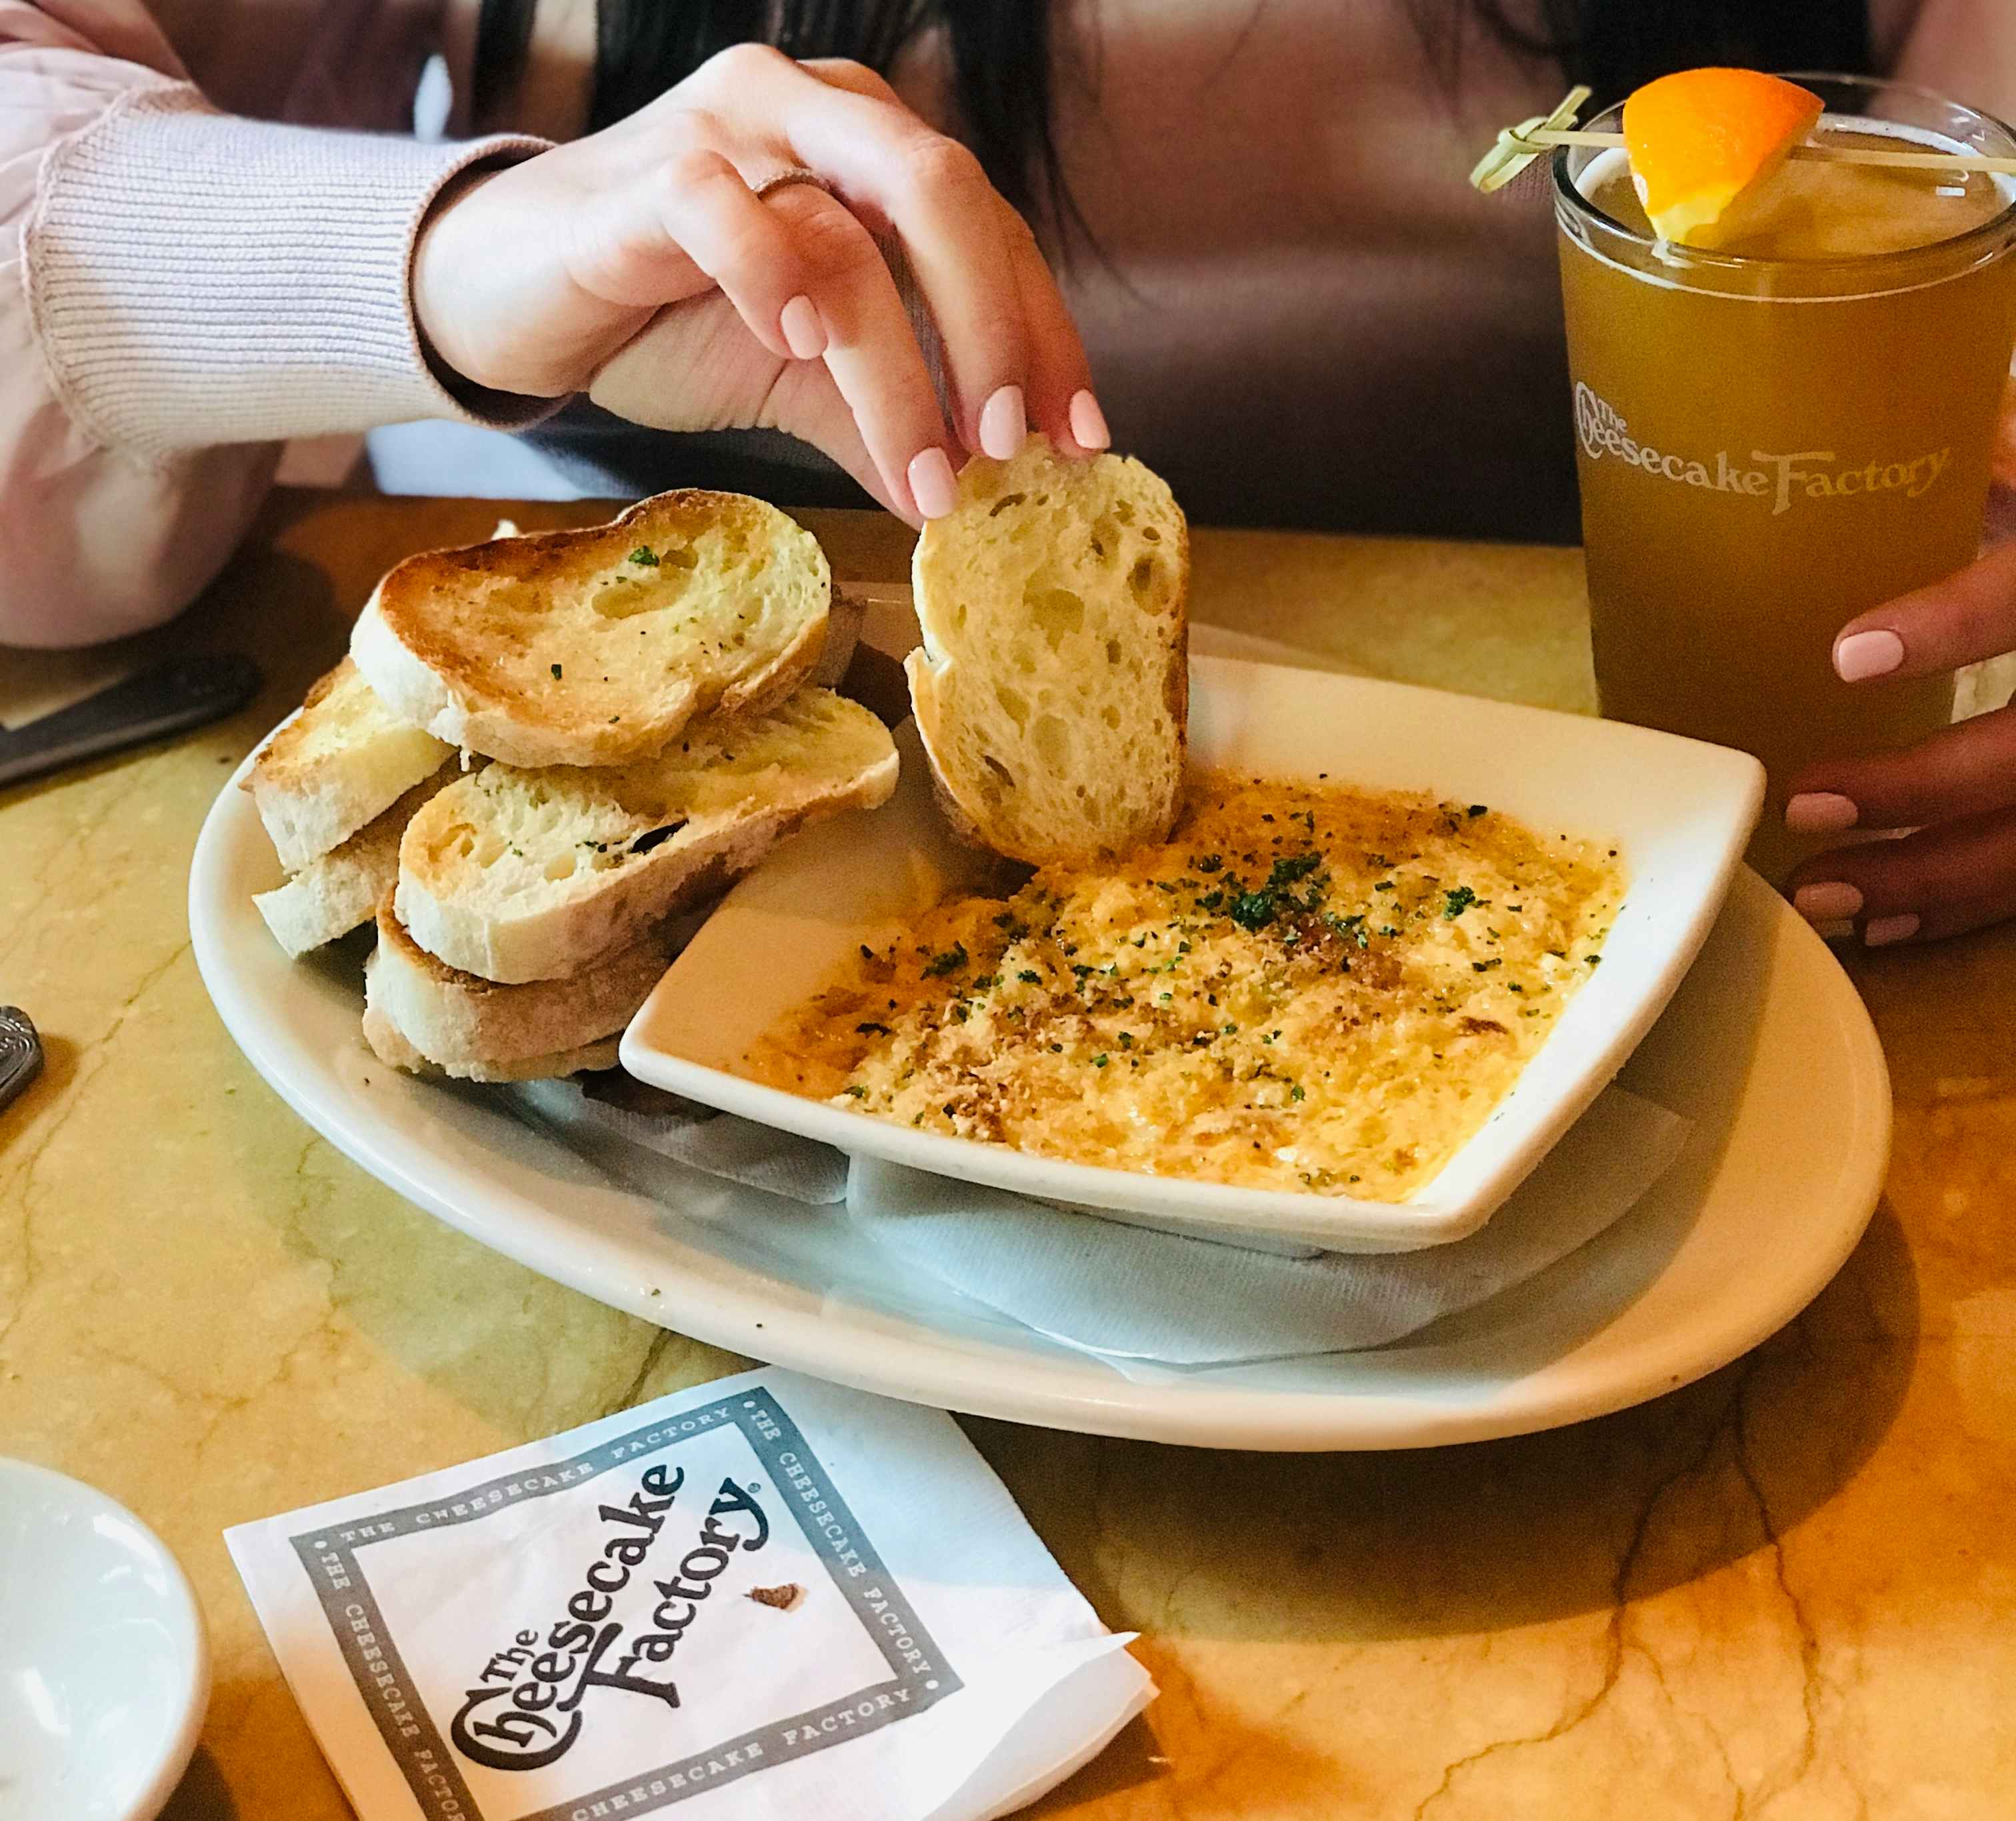 A person sitting at a table at The Cheesecake Factory, dipping a piece of bread into a bowl of dip and holding a drink with their other hand.